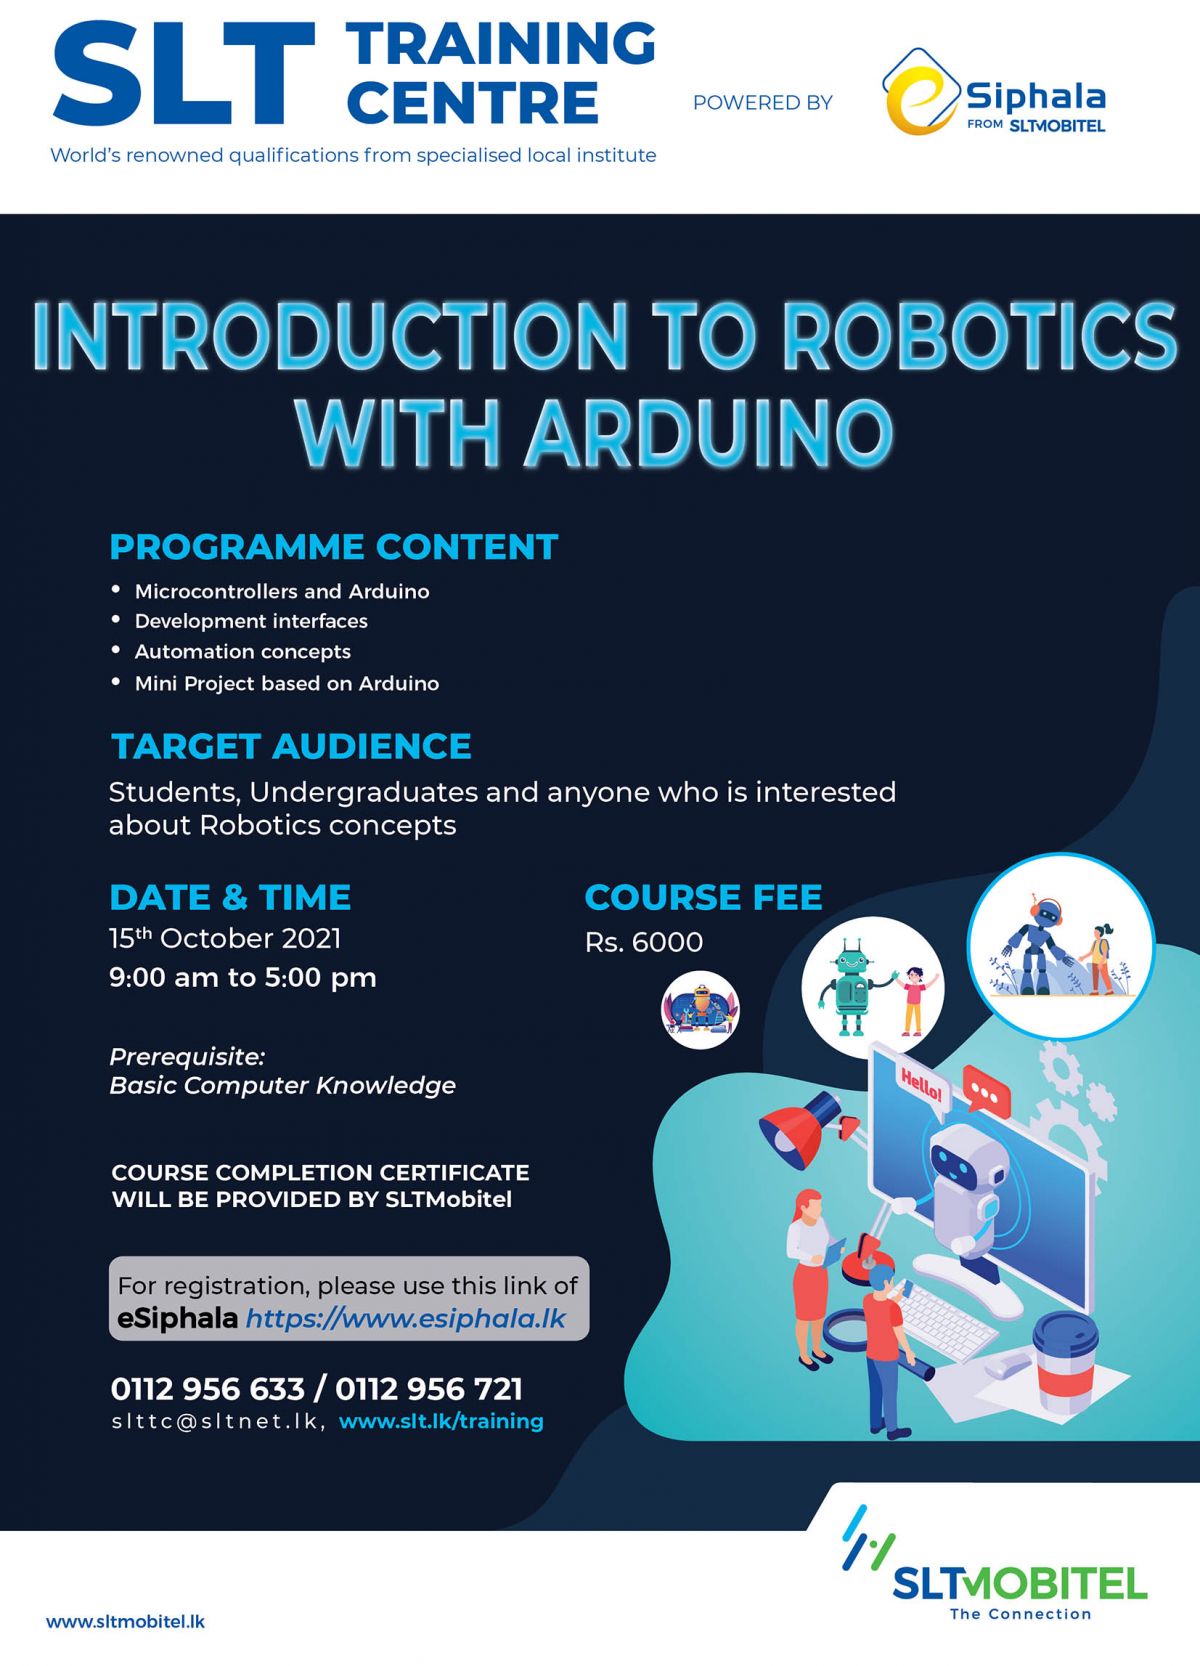 Introduction to Robotics with Arduino- October 2021